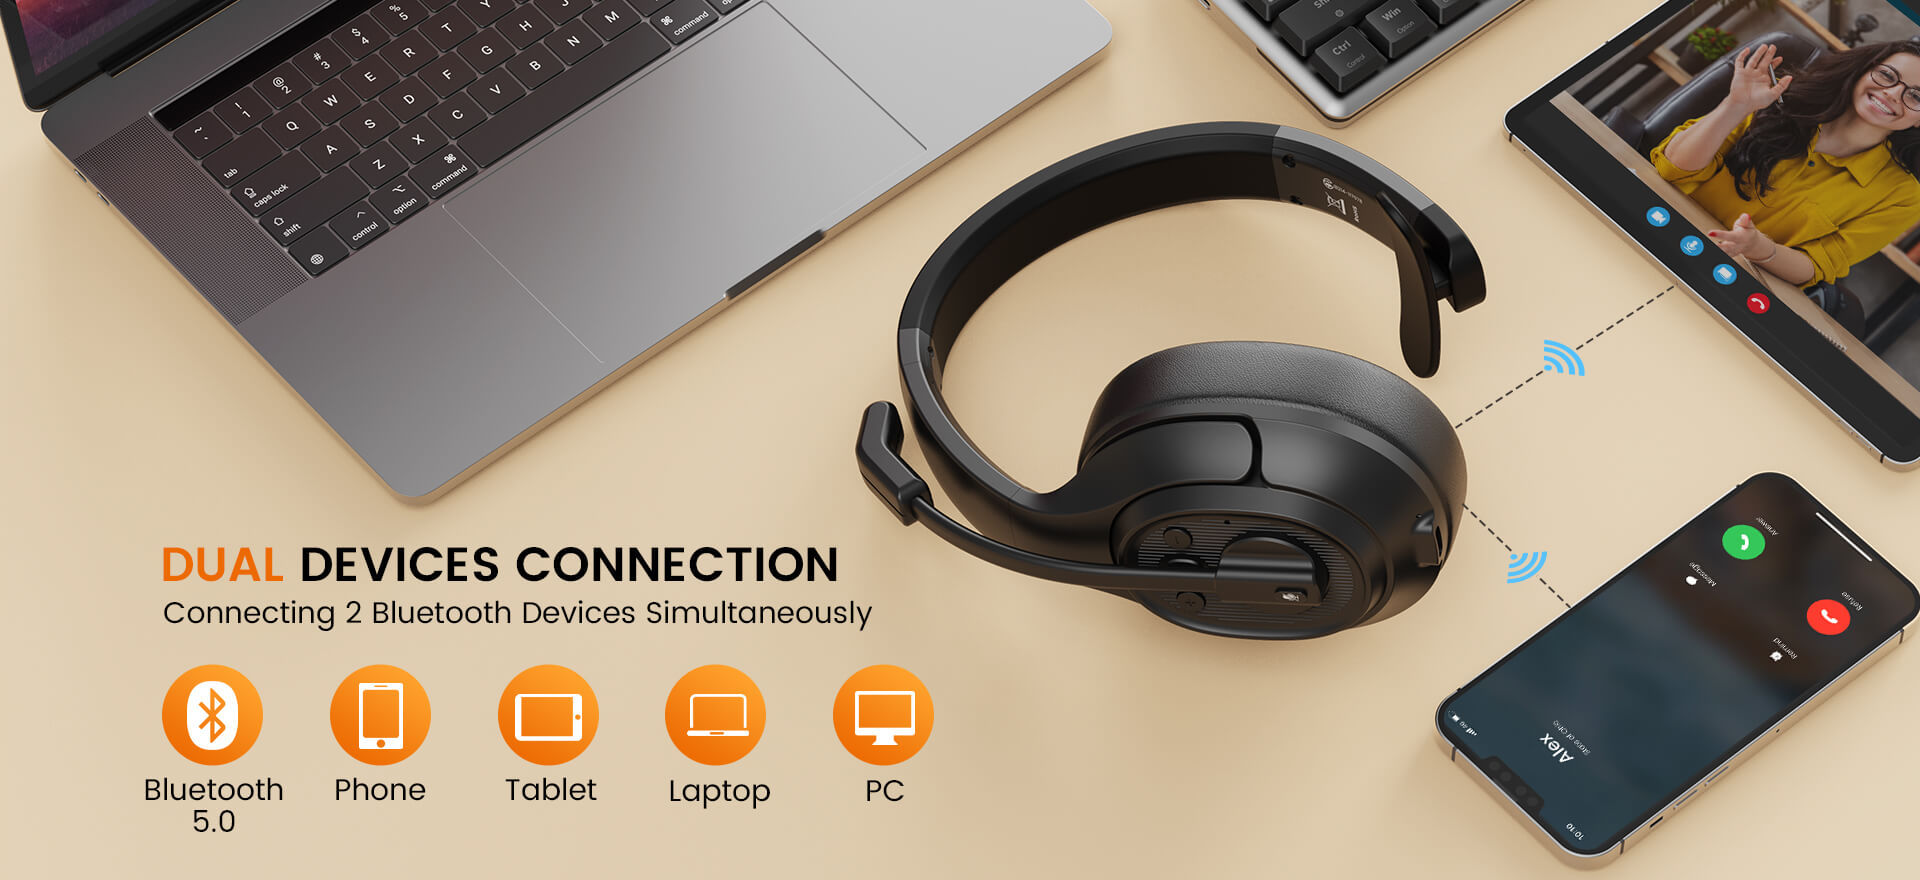 H1 headset with dual devices connection capability, enabling simultaneous pairing with two devices for seamless call reception and music playback.